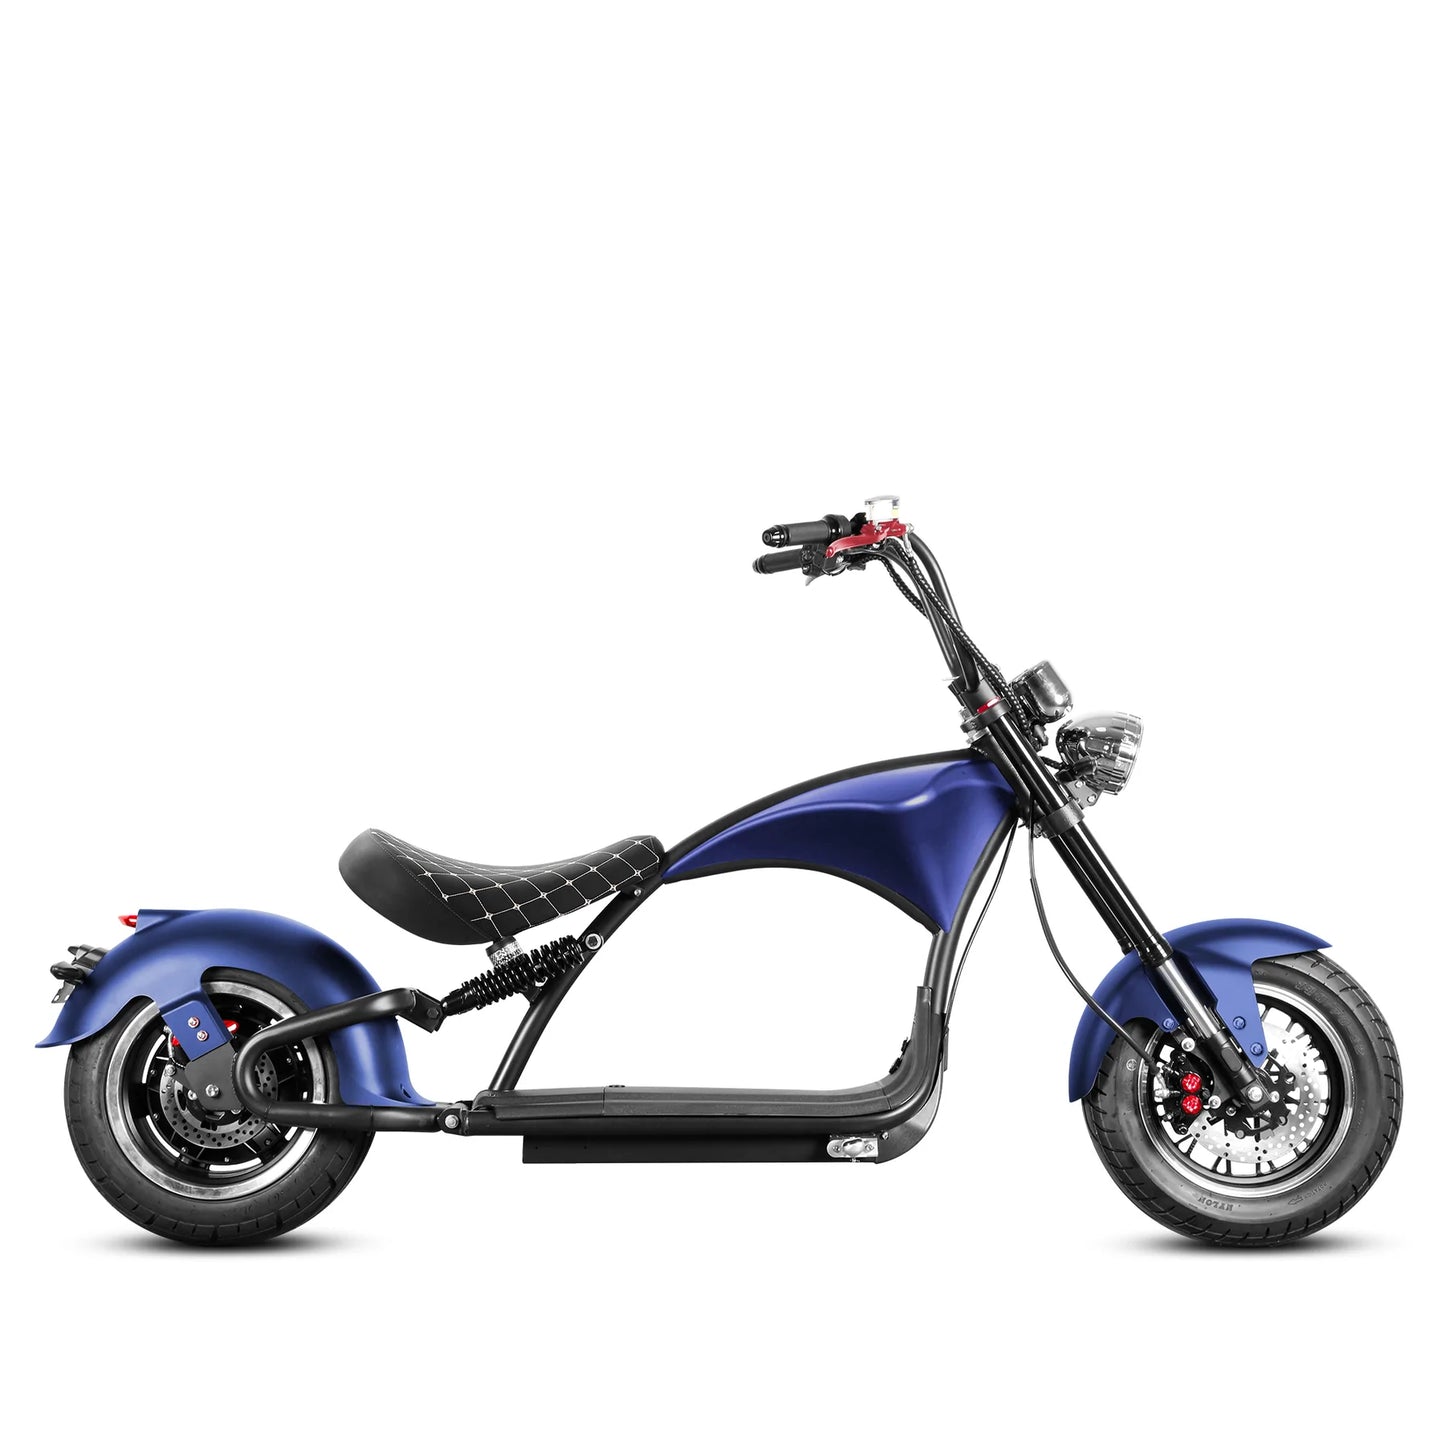 Eahora Emars M1P Electric Scooter - Blueberries Blue | Bike Lover USA